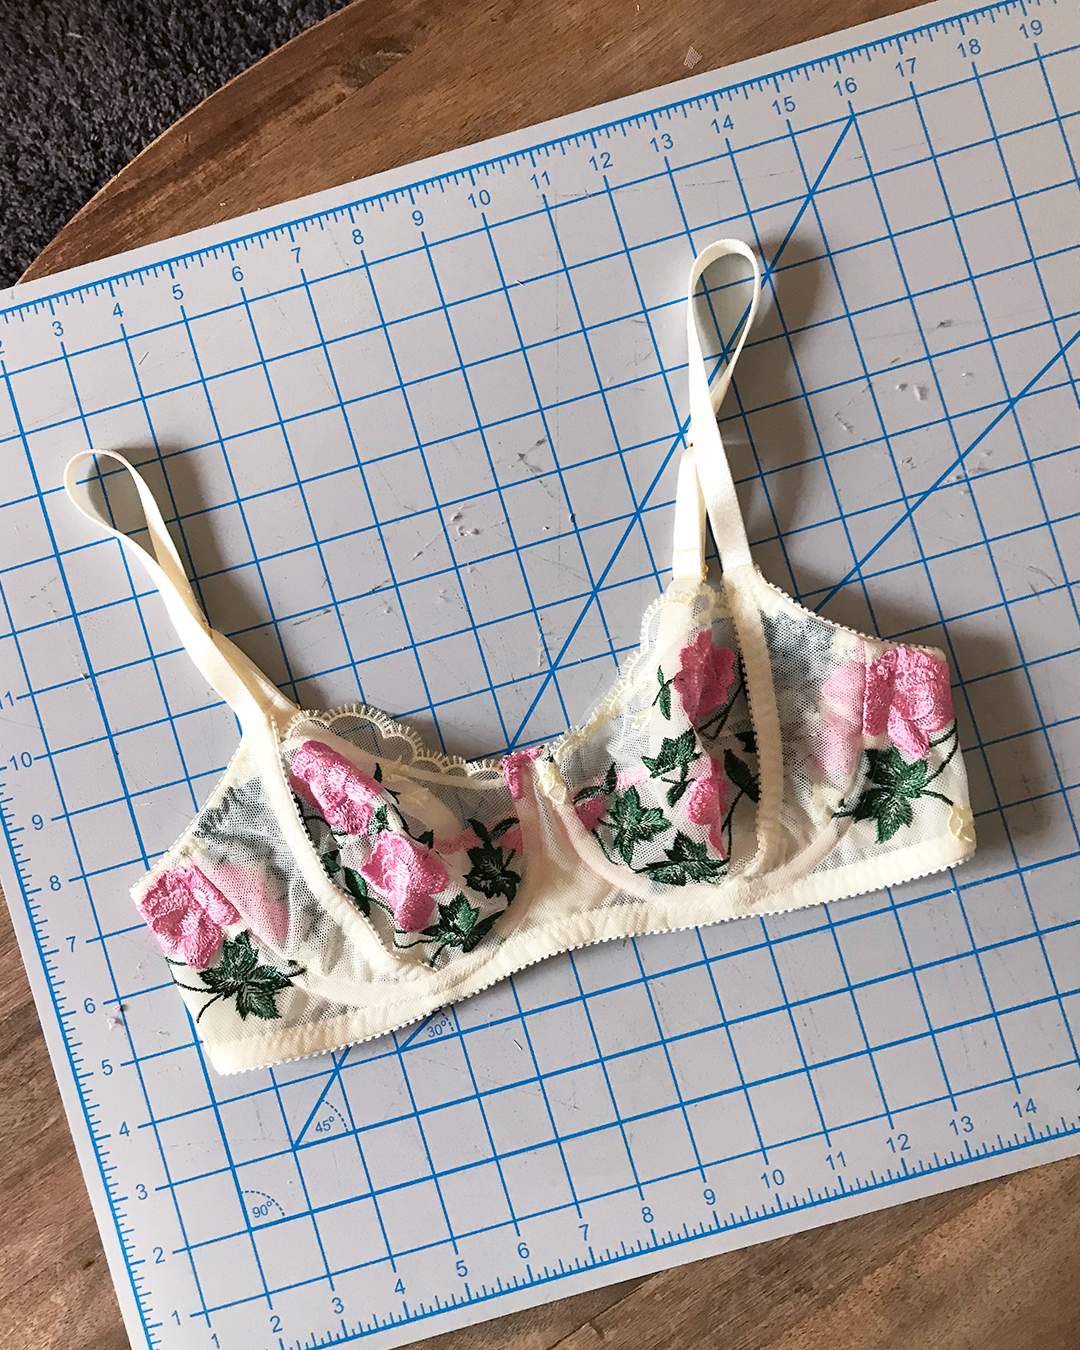 Hook and Eye Settings on a Bra: What Are They For and Do I Need